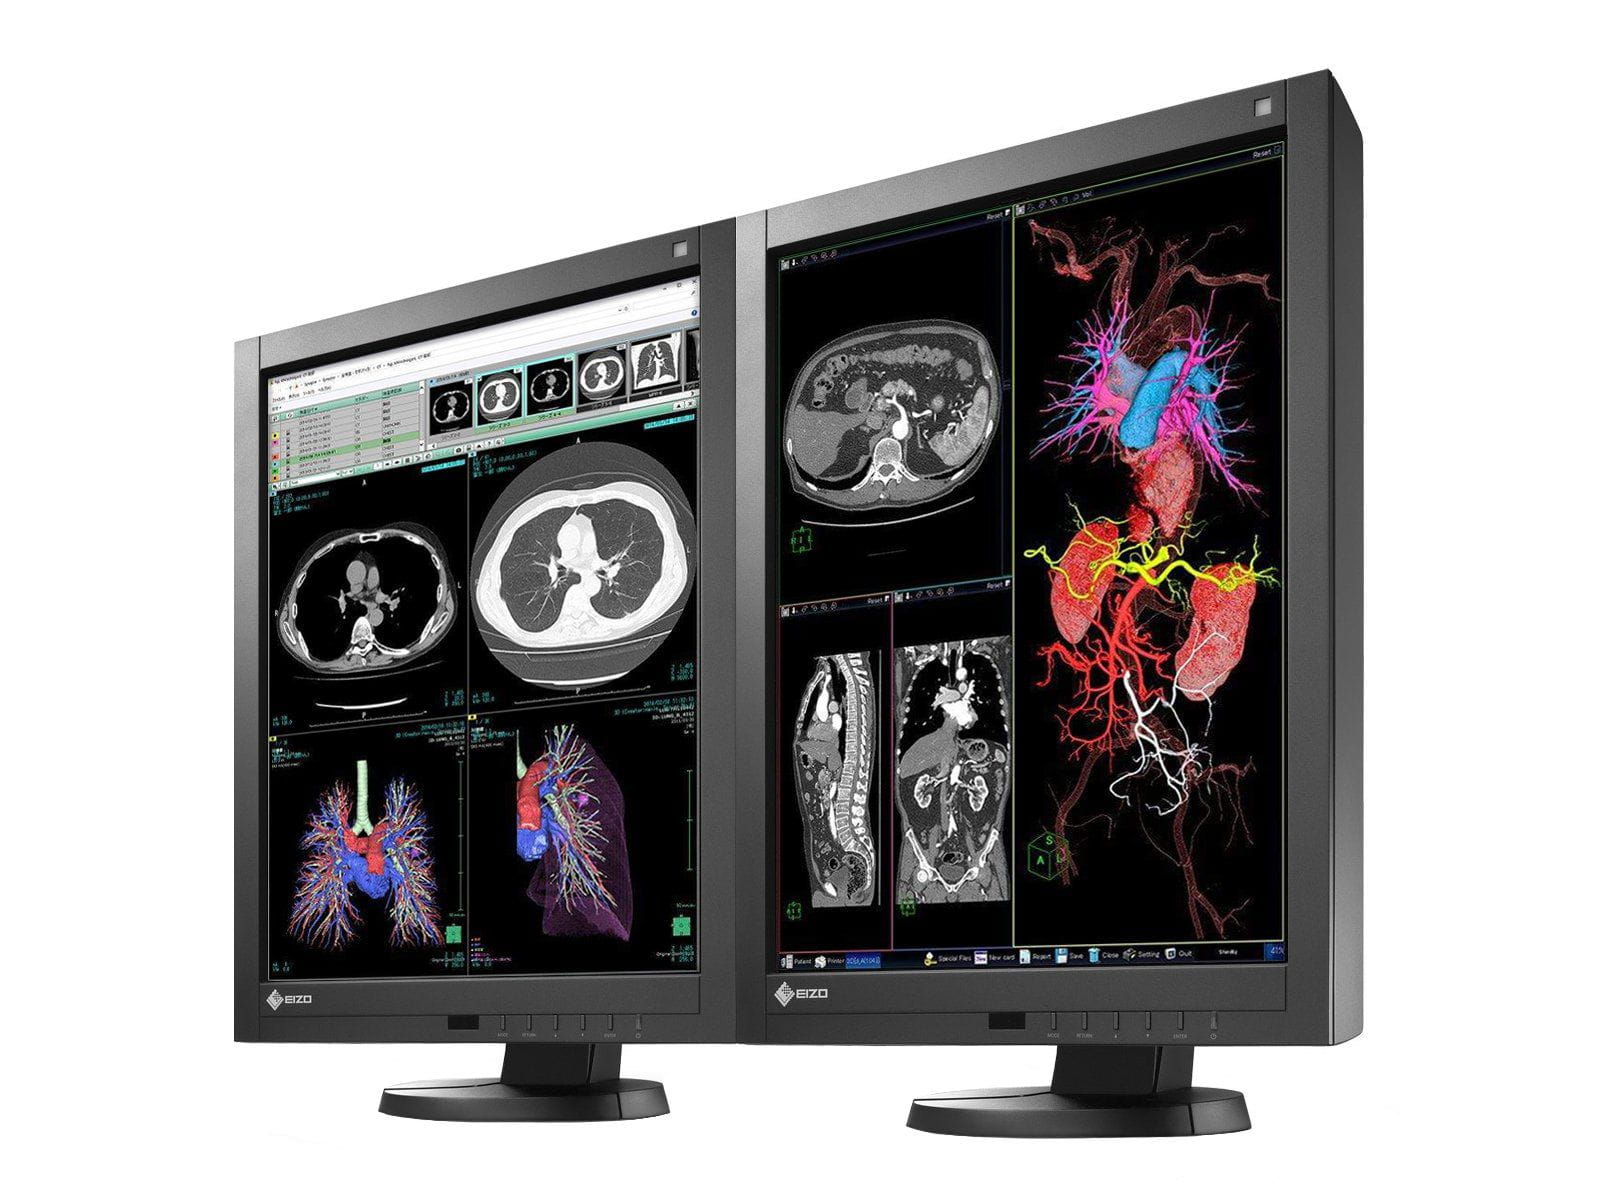 Complete PACS General Radiology Station | Eizo 3MP Color LED Displays | HP Workstation | Dictation Mic | Worklist Monitor (RX340Z2R) Monitors.com 